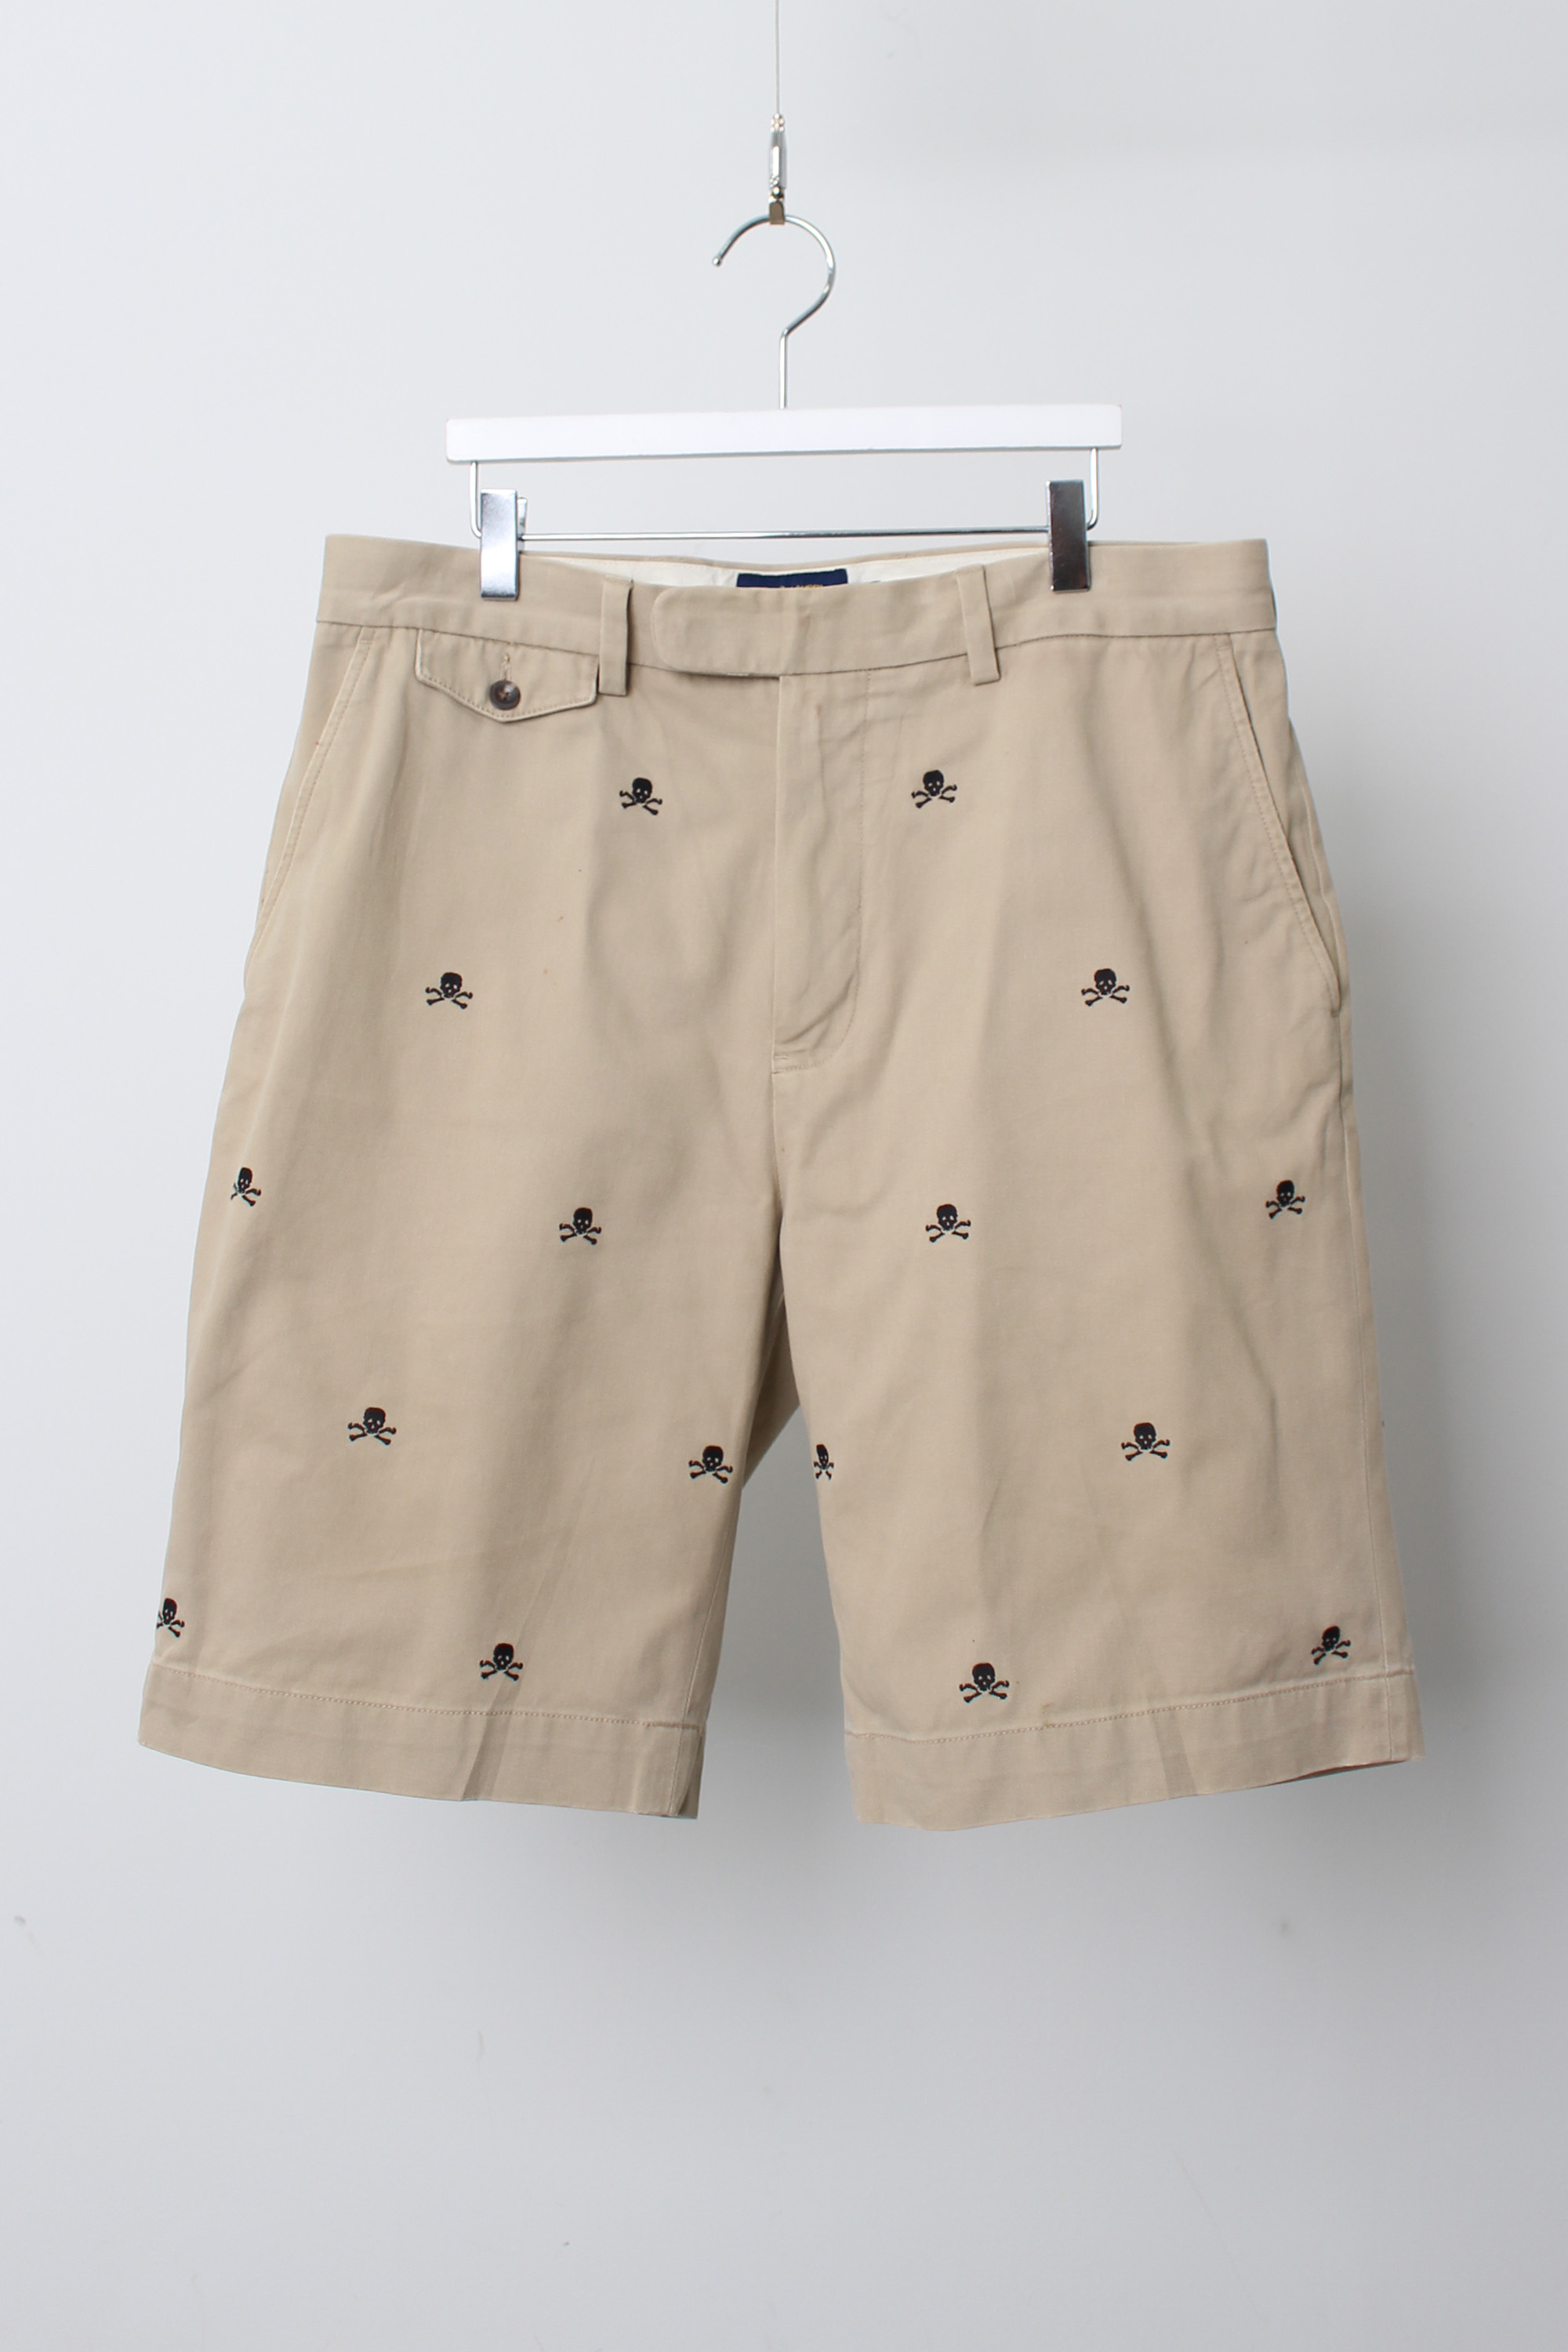 polo ralph lauren RUGBY shorts